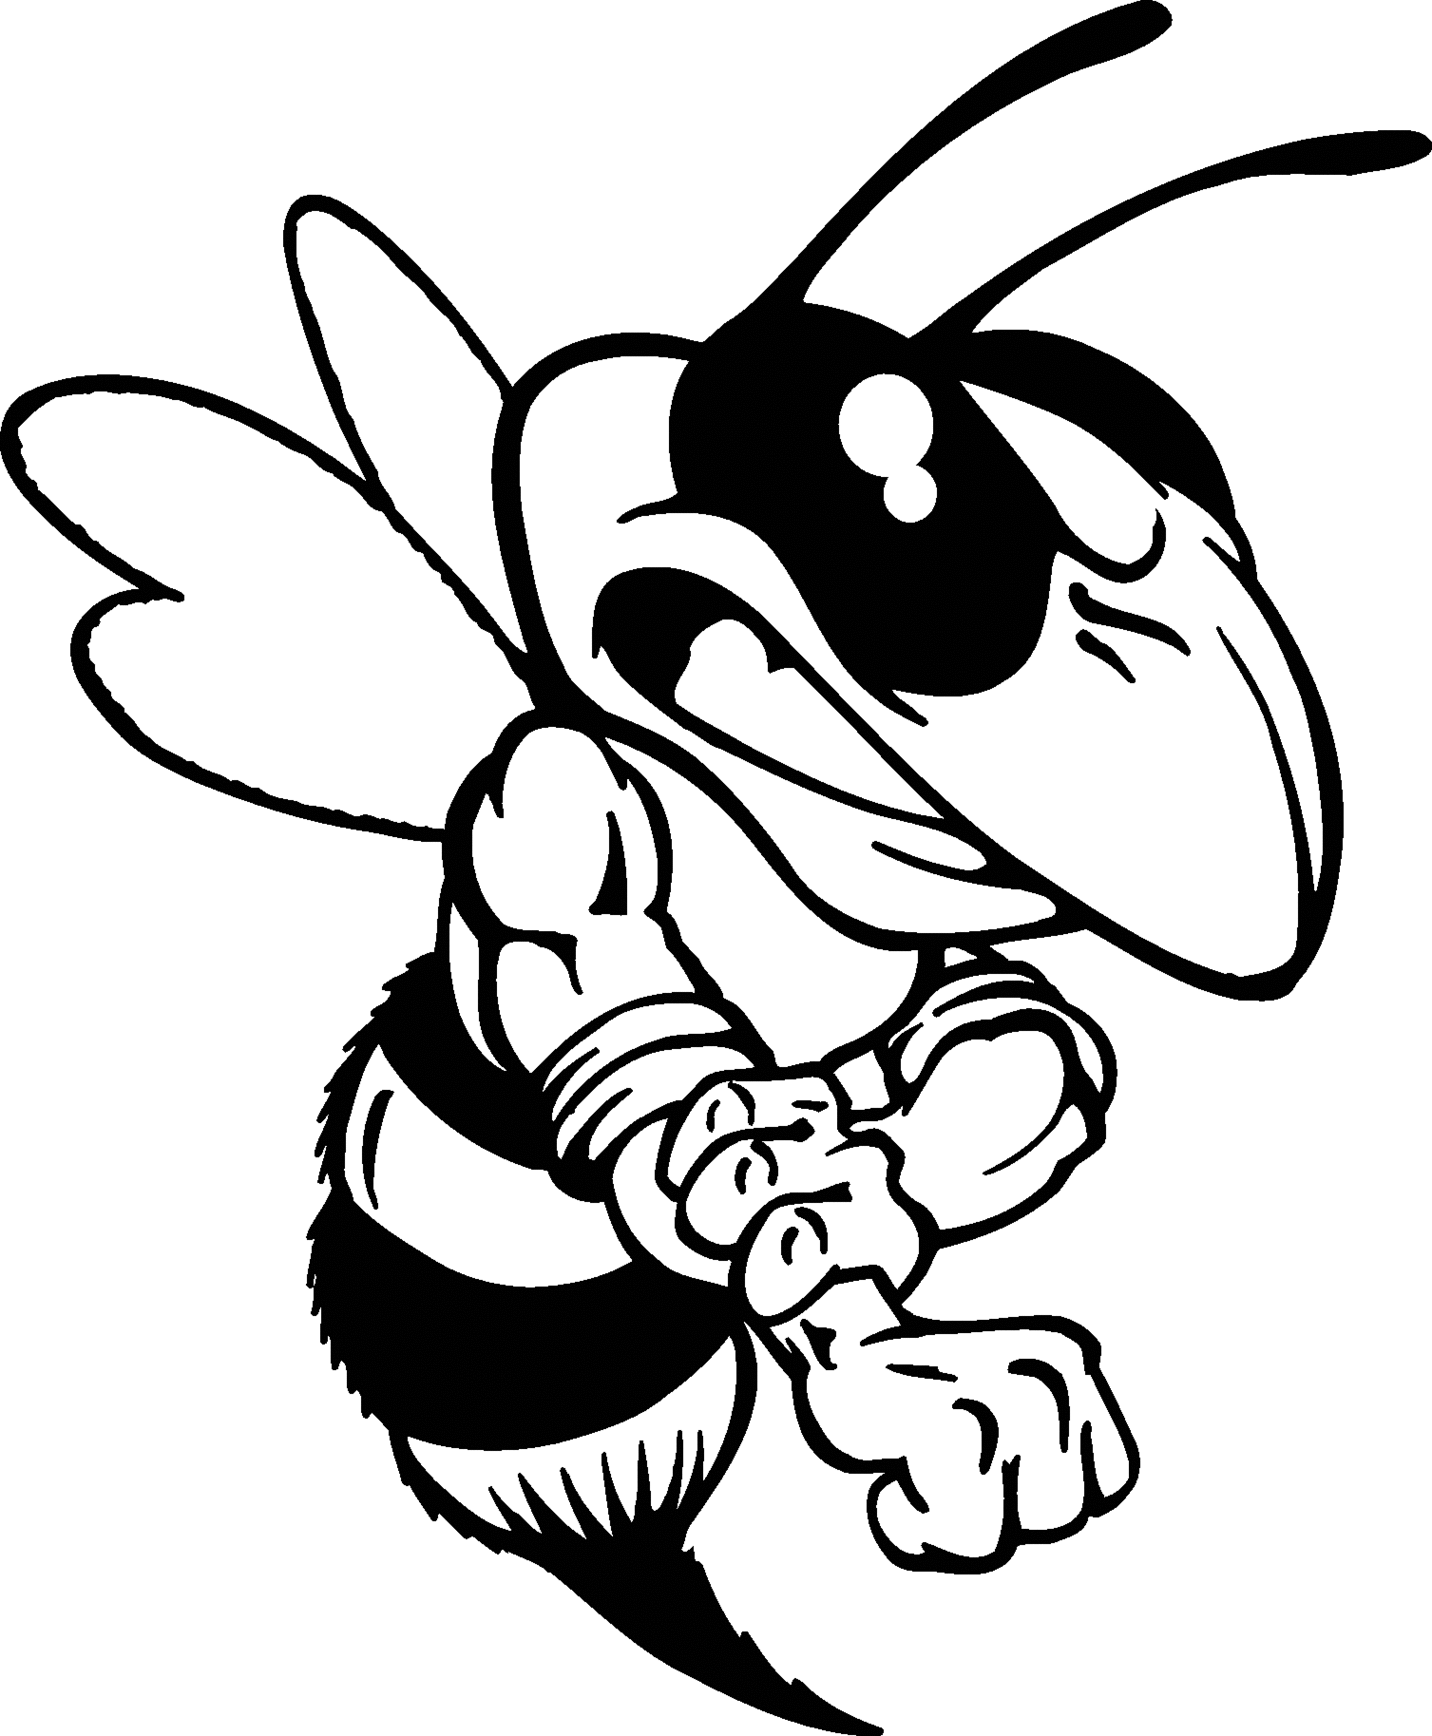 Bee Line Drawing Clipart - Free to use Clip Art Resource